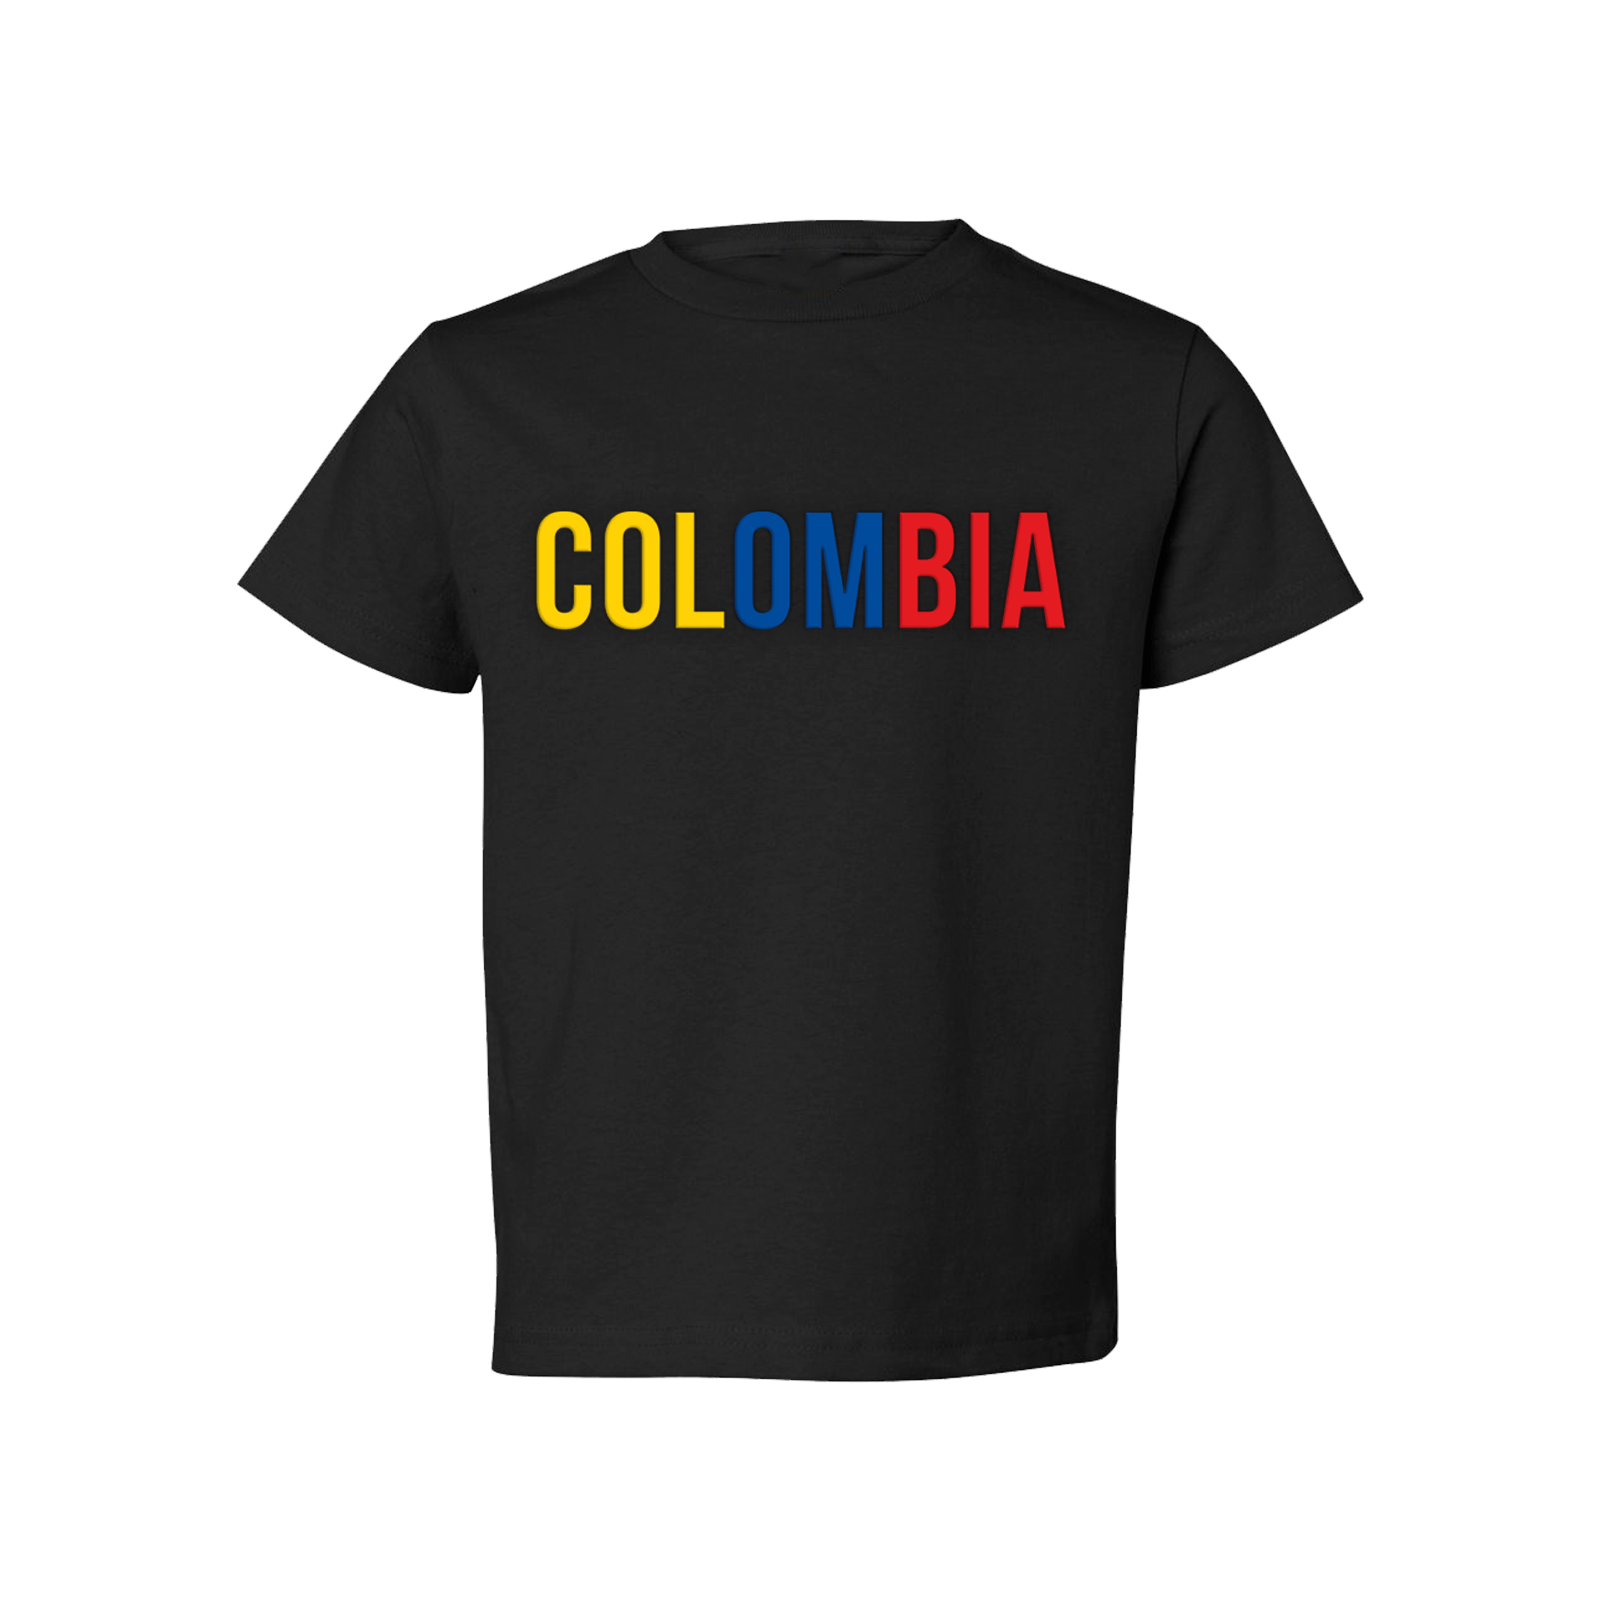 Colombia Short Sleeve Shirt - Babies & Toddlers